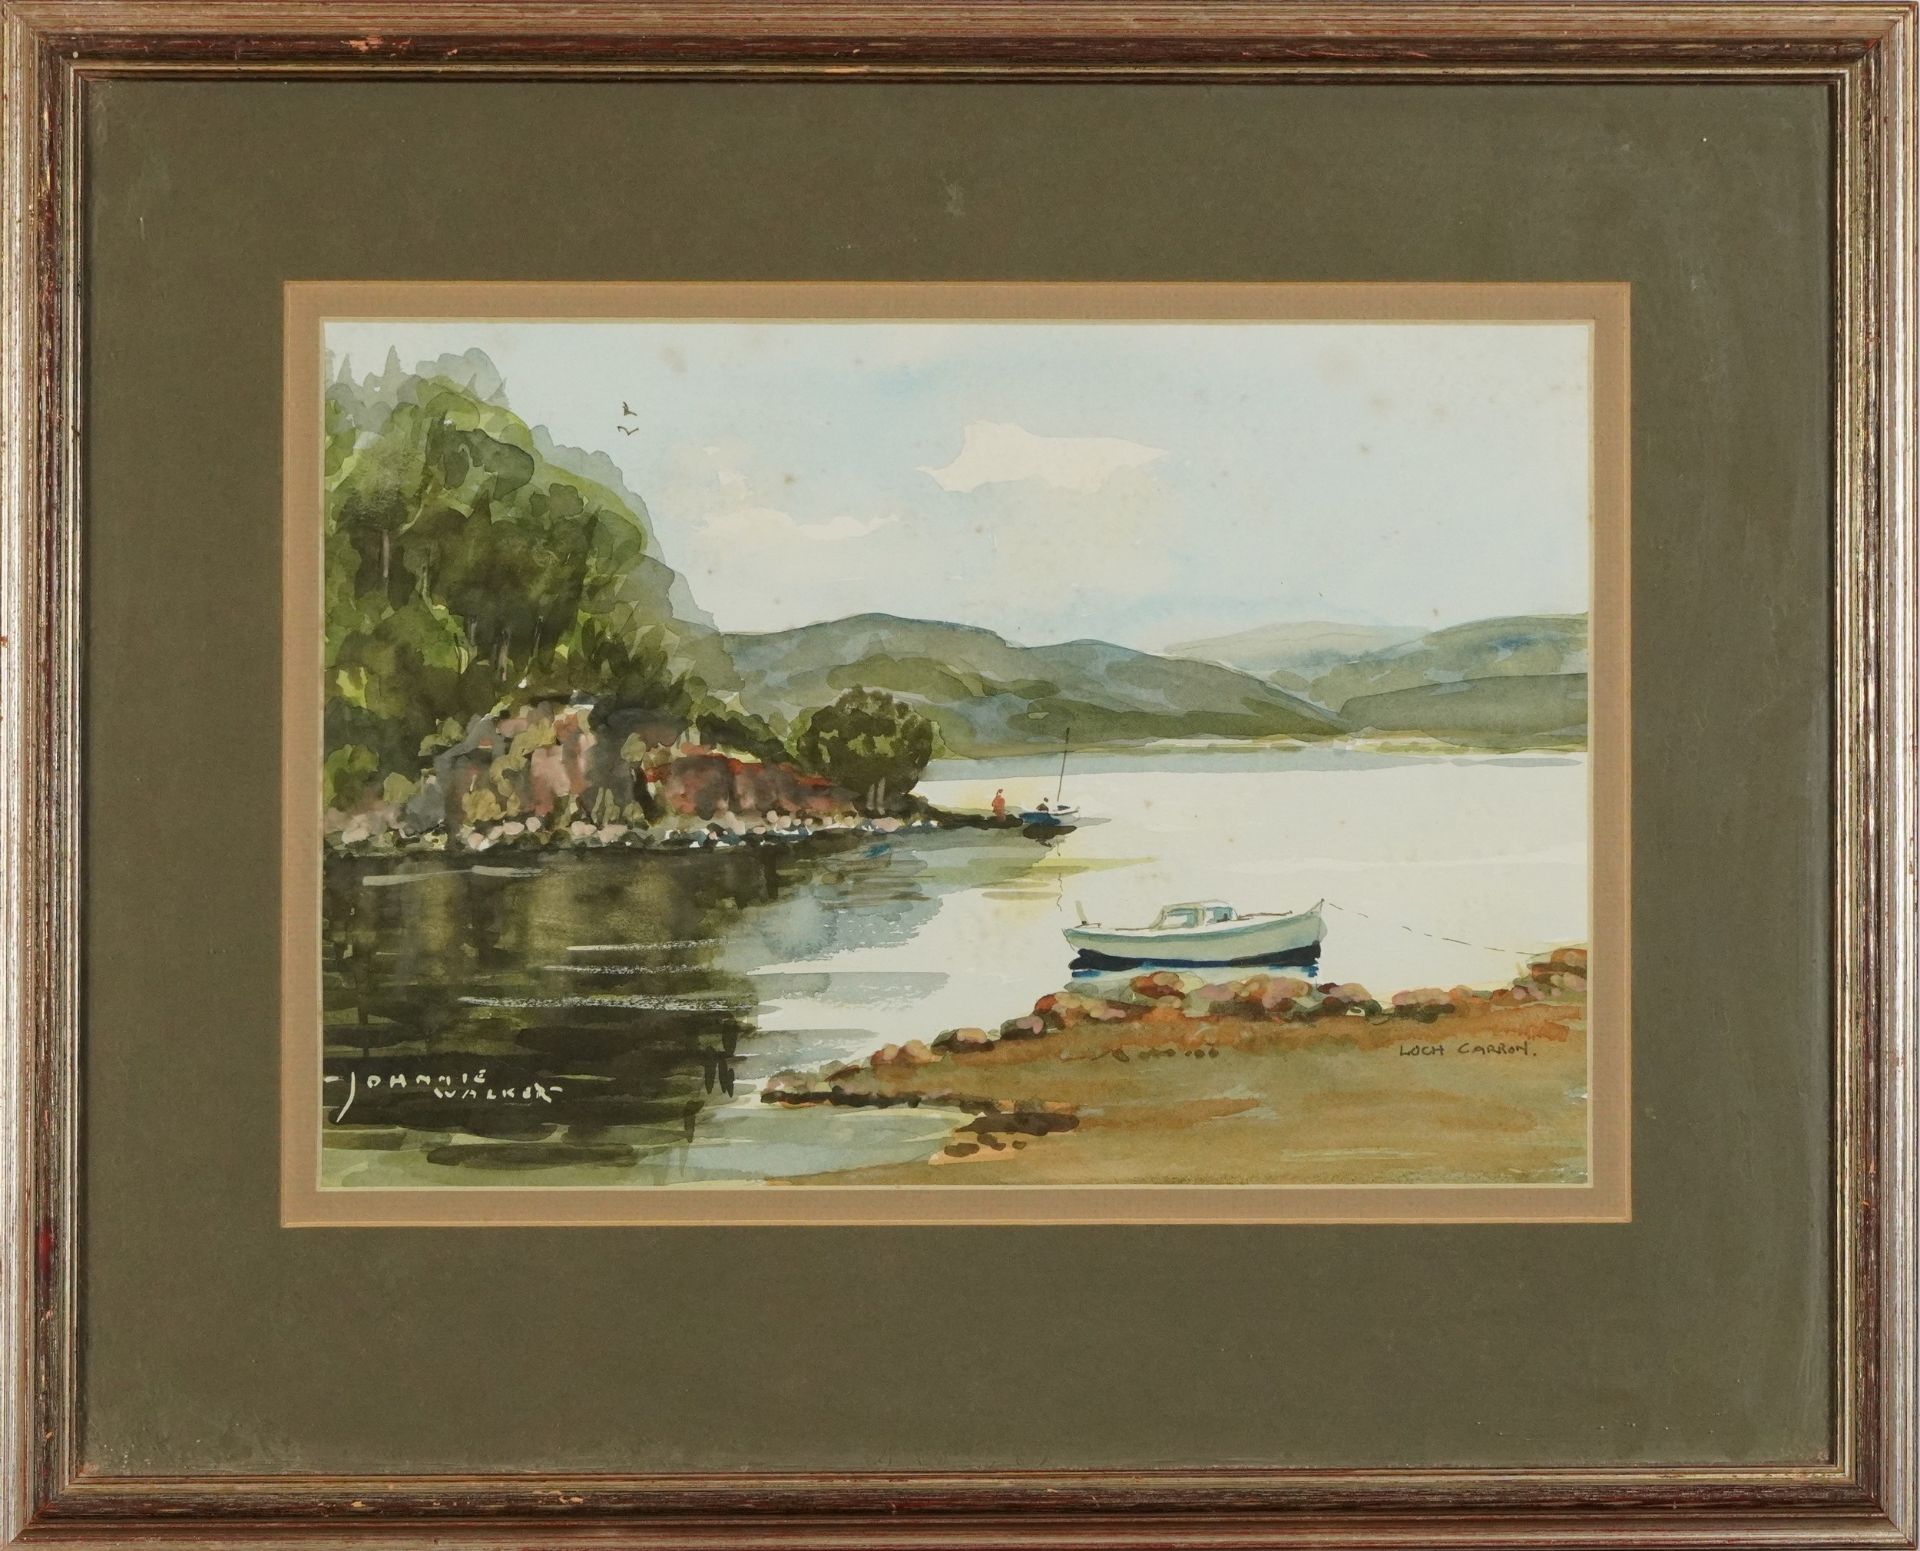 Johnnie Walker - Loch Carron, Scottish watercolour, mounted, framed and glazed, 37cm x 26cm - Image 2 of 6